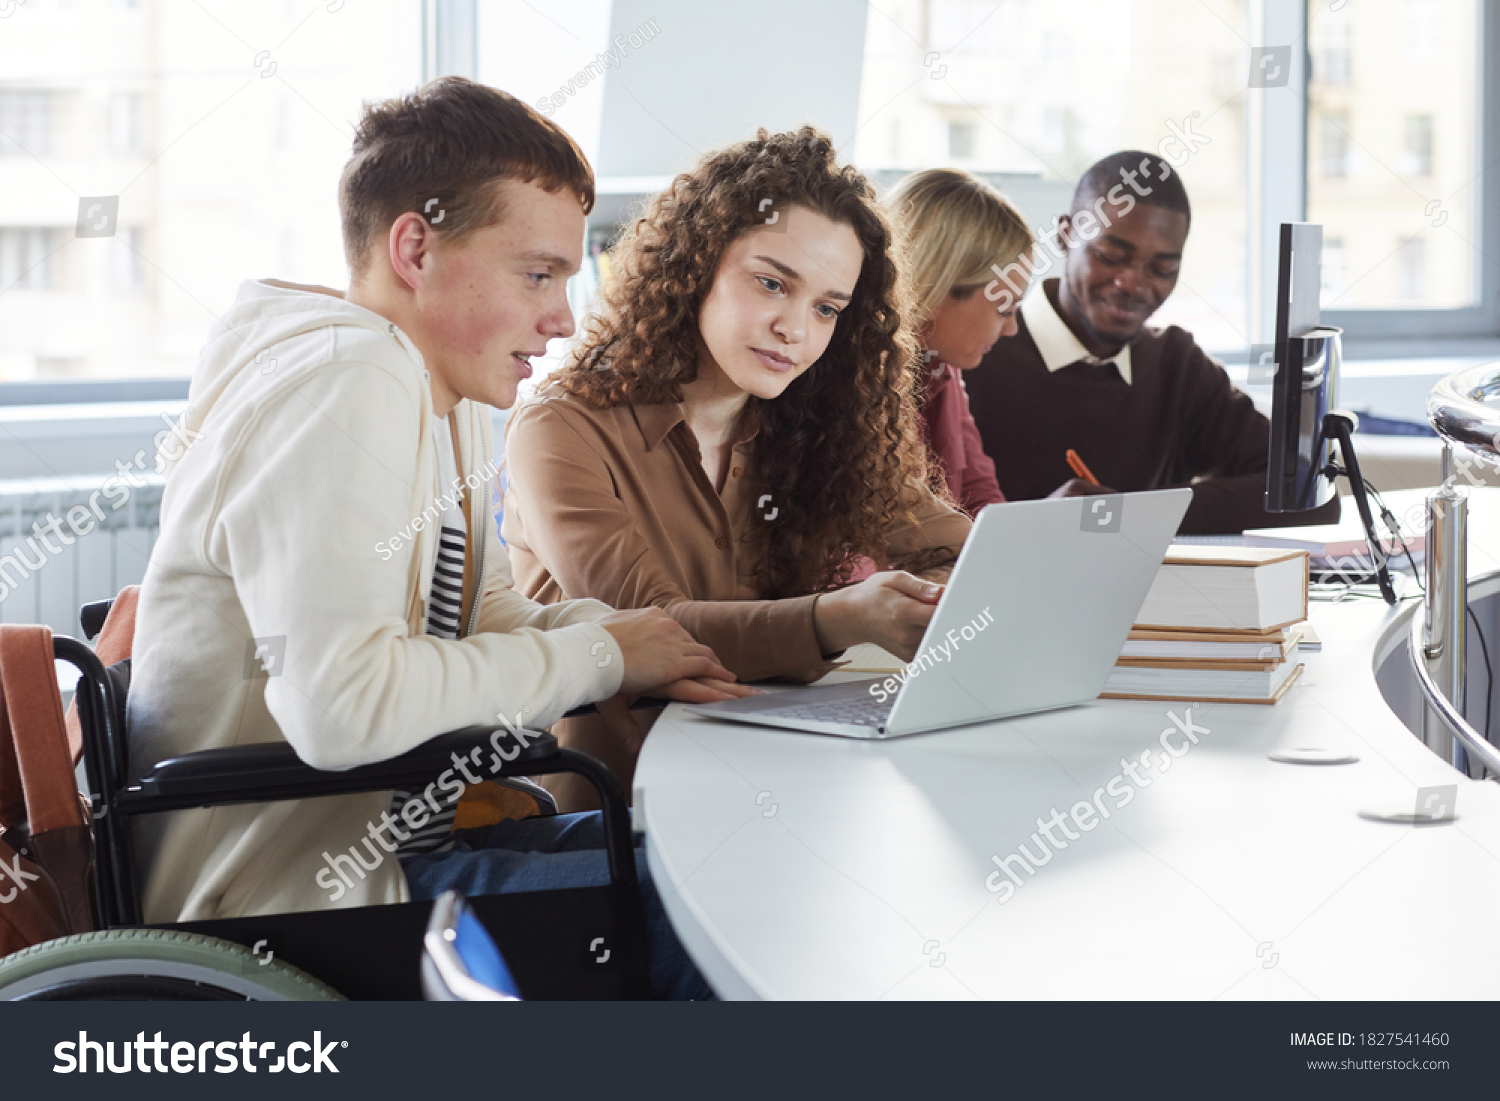 Side view at multi-ethnic group of students using laptop while studying in college, featuring boy using wheelchair #1827541460